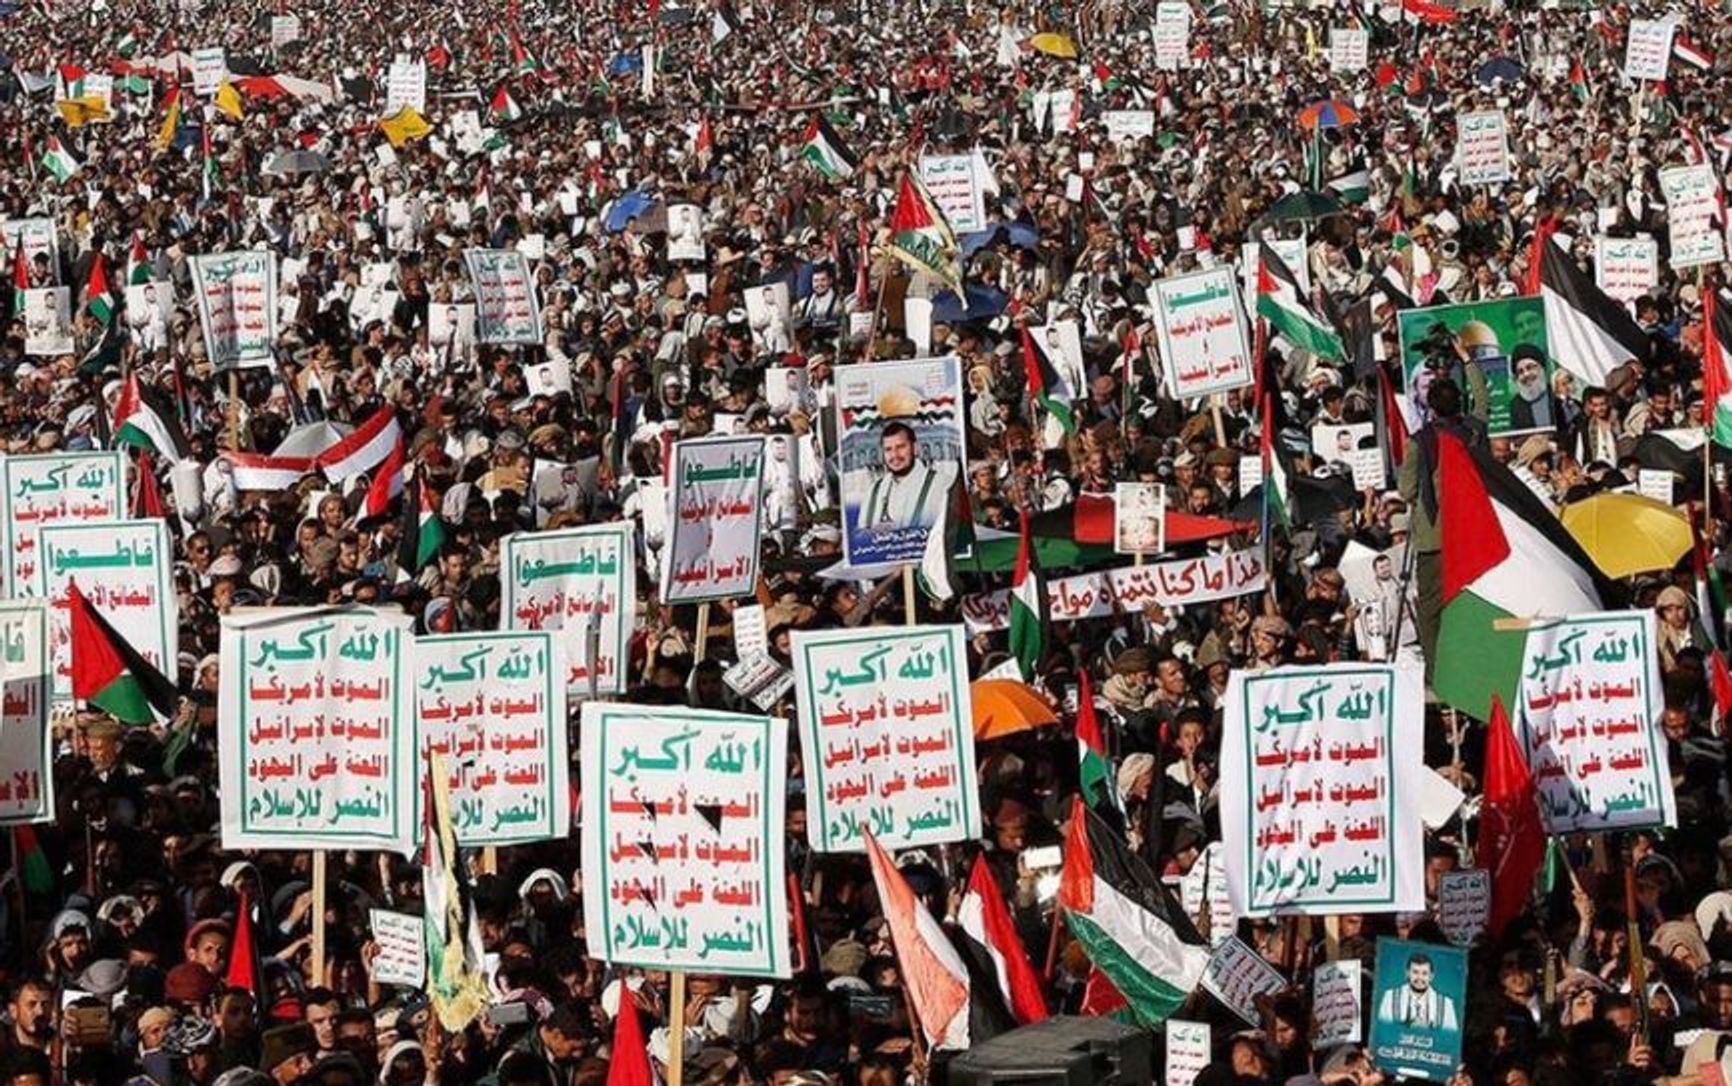 A Houthi demonstration with posters and placards reading: “God Is the Greatest, Death to America, Death to Israel, A Curse Upon the Jews, Victory to Islam!”